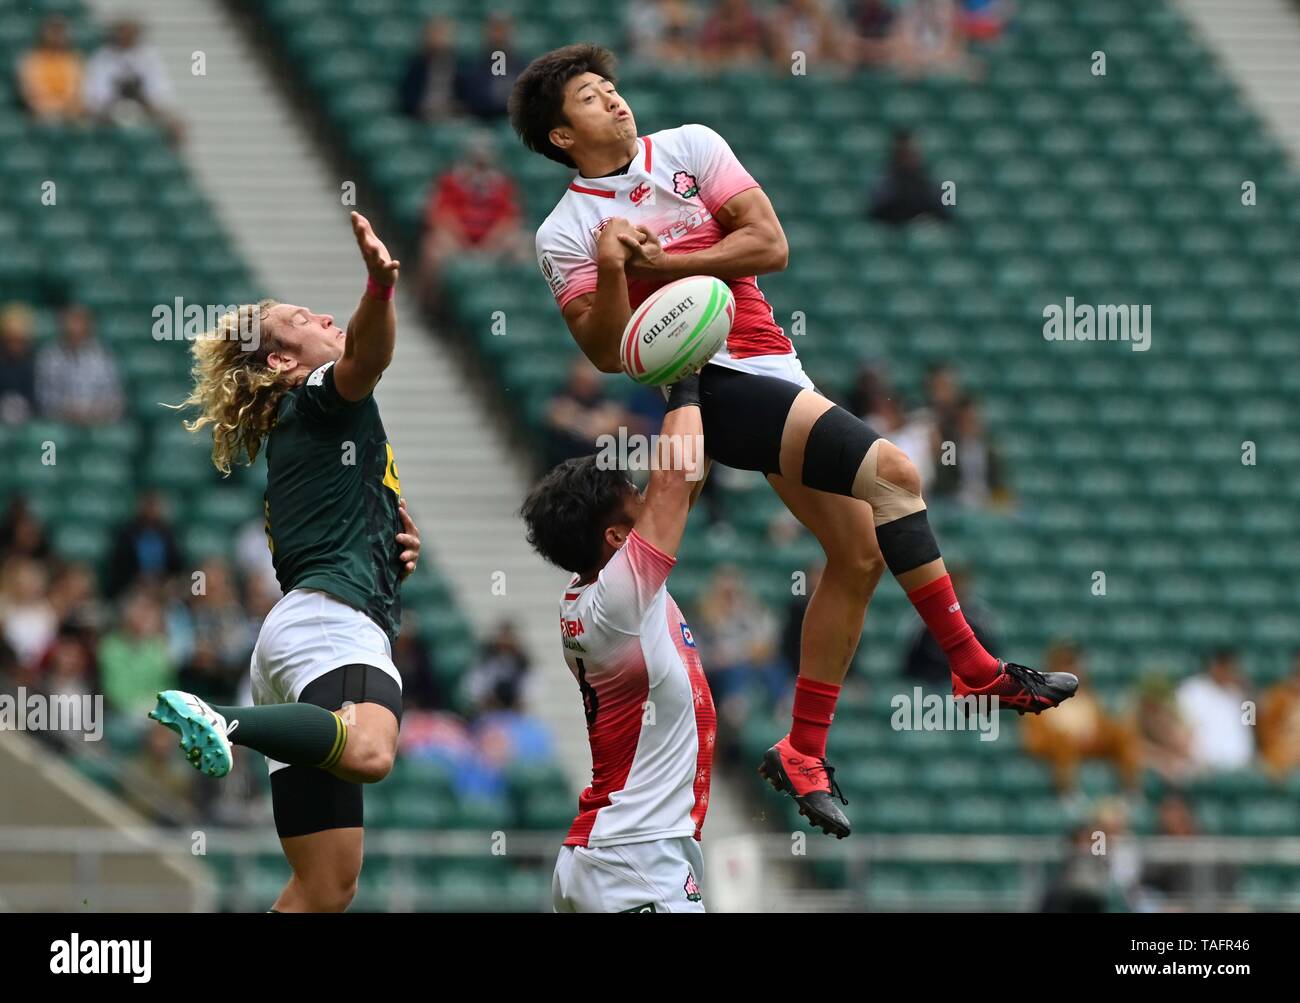 Twickenham. London, UK. 25th May, 2019. HSBC world rugby sevens series. Kosuke Hashino (Japan) tries to catch. 25/05/2019. Credit: Sport In Pictures/Alamy Live News Stock Photo